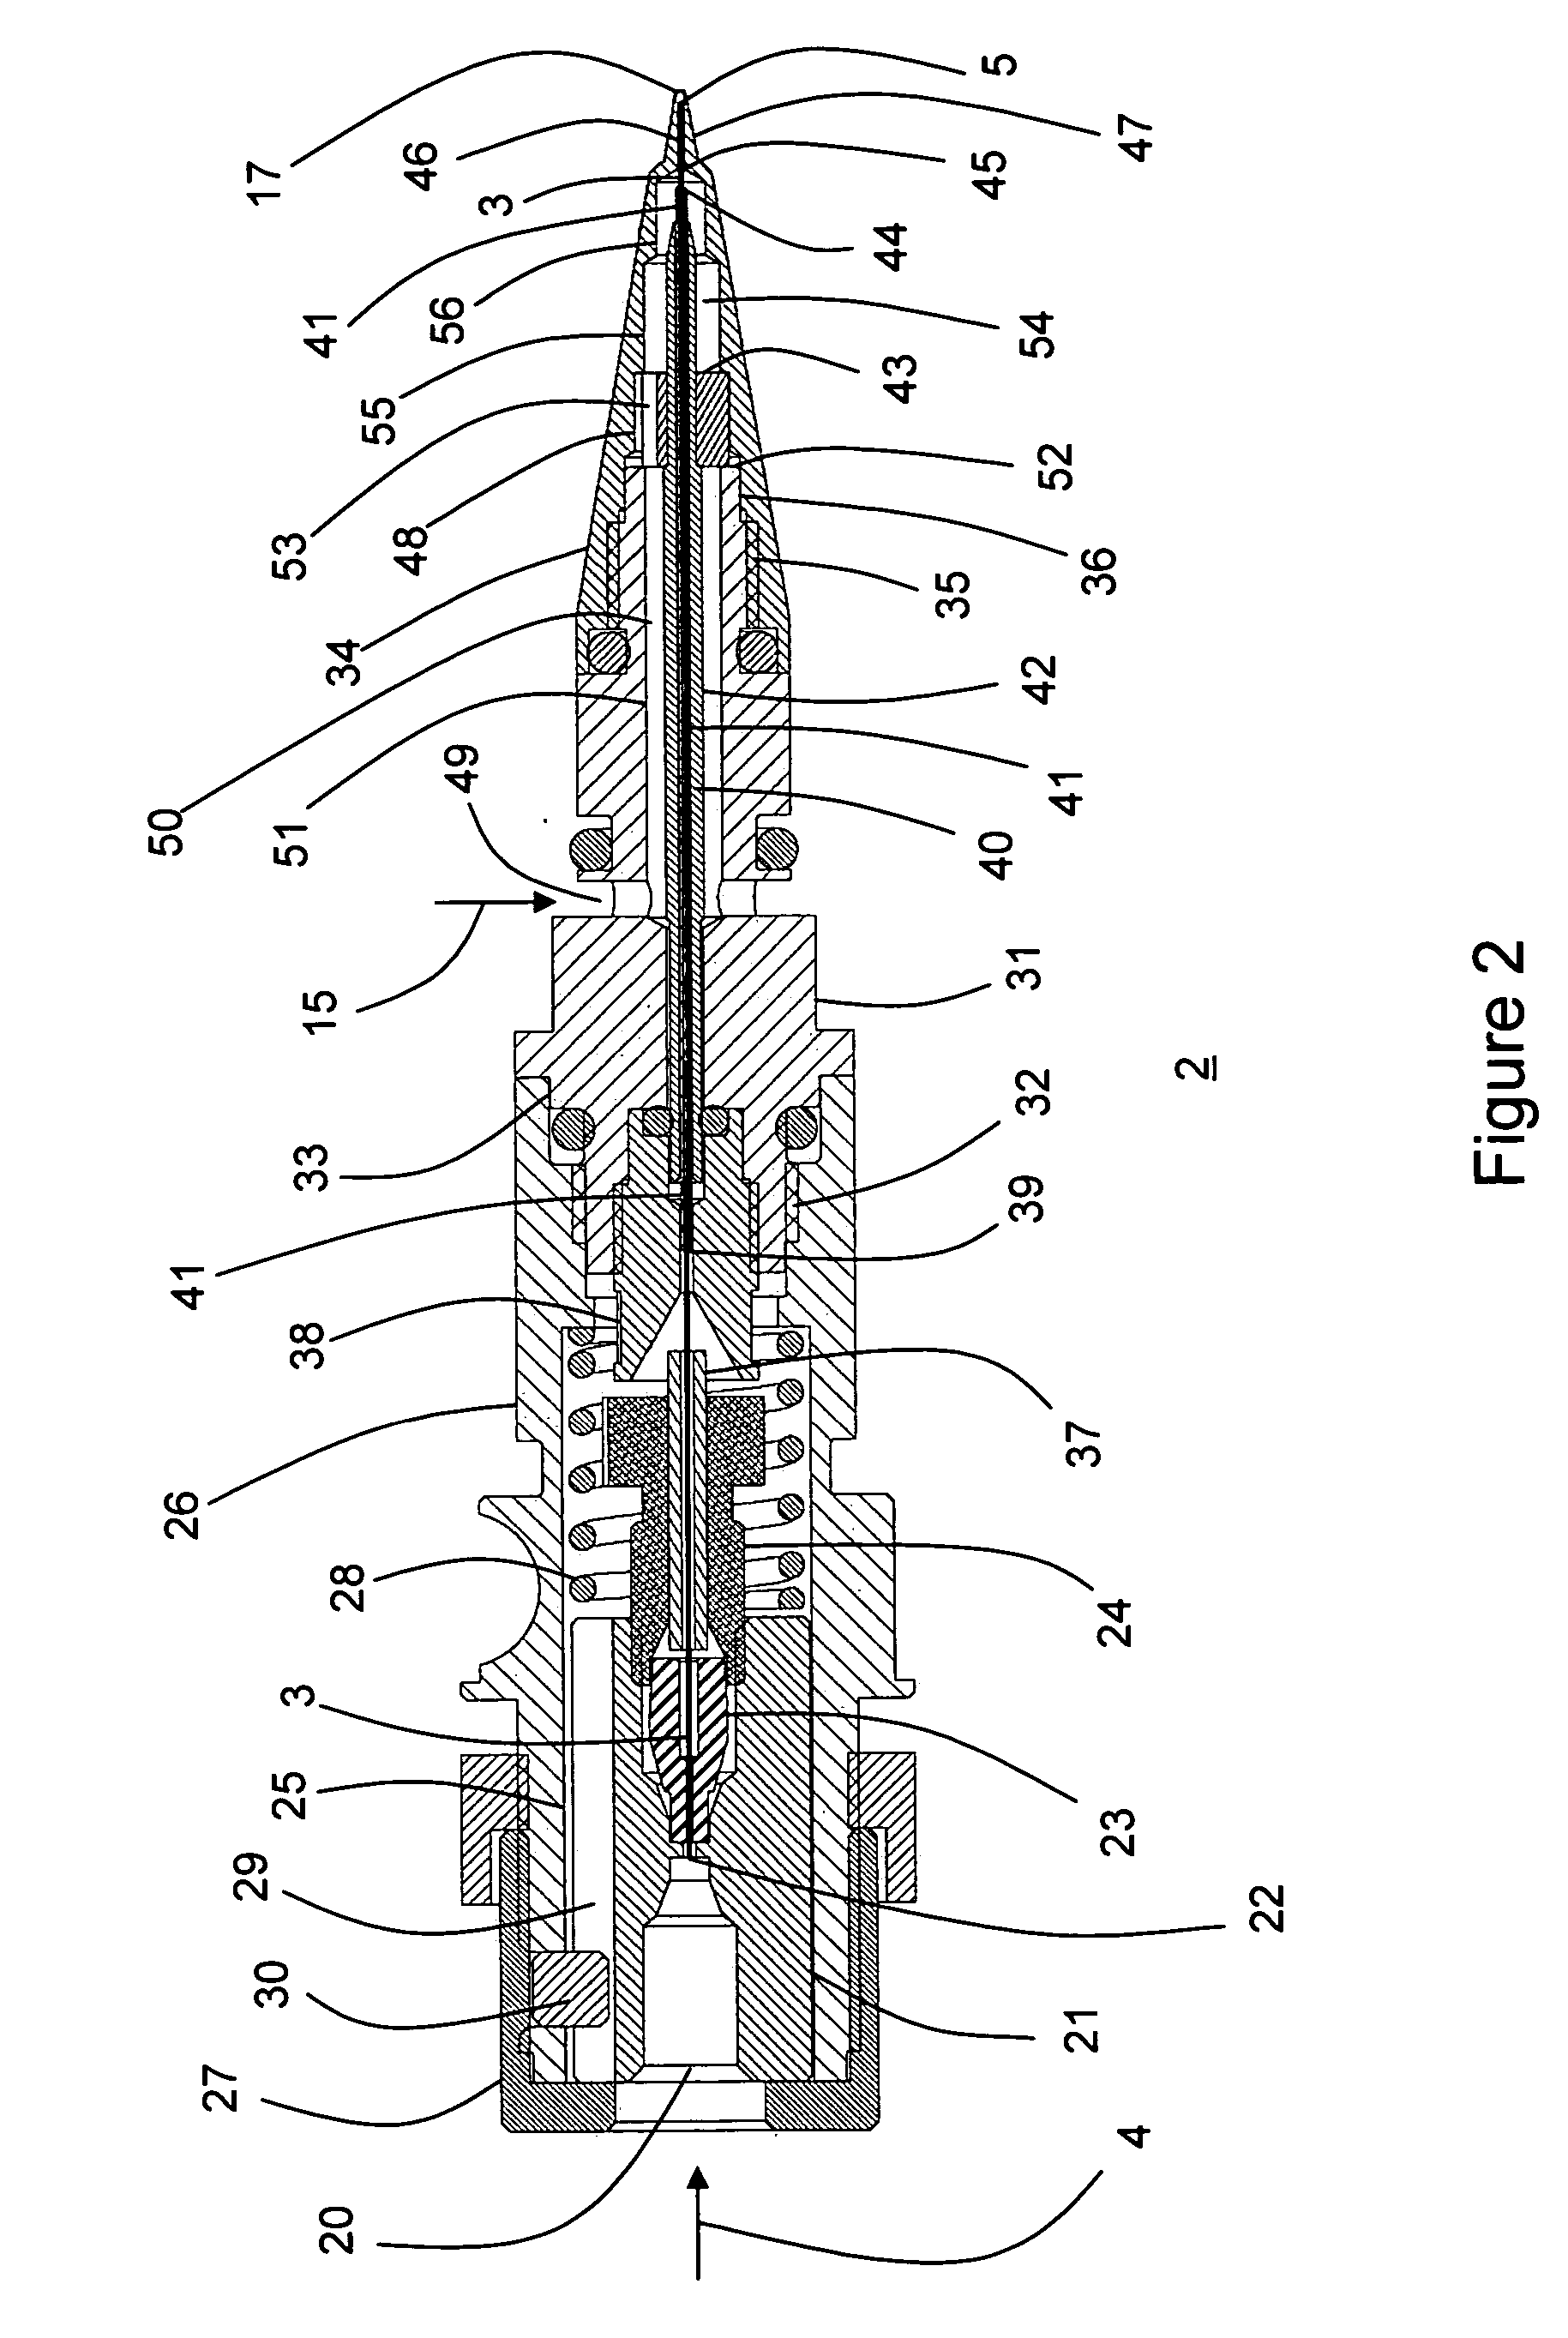 Charged droplet spray probe